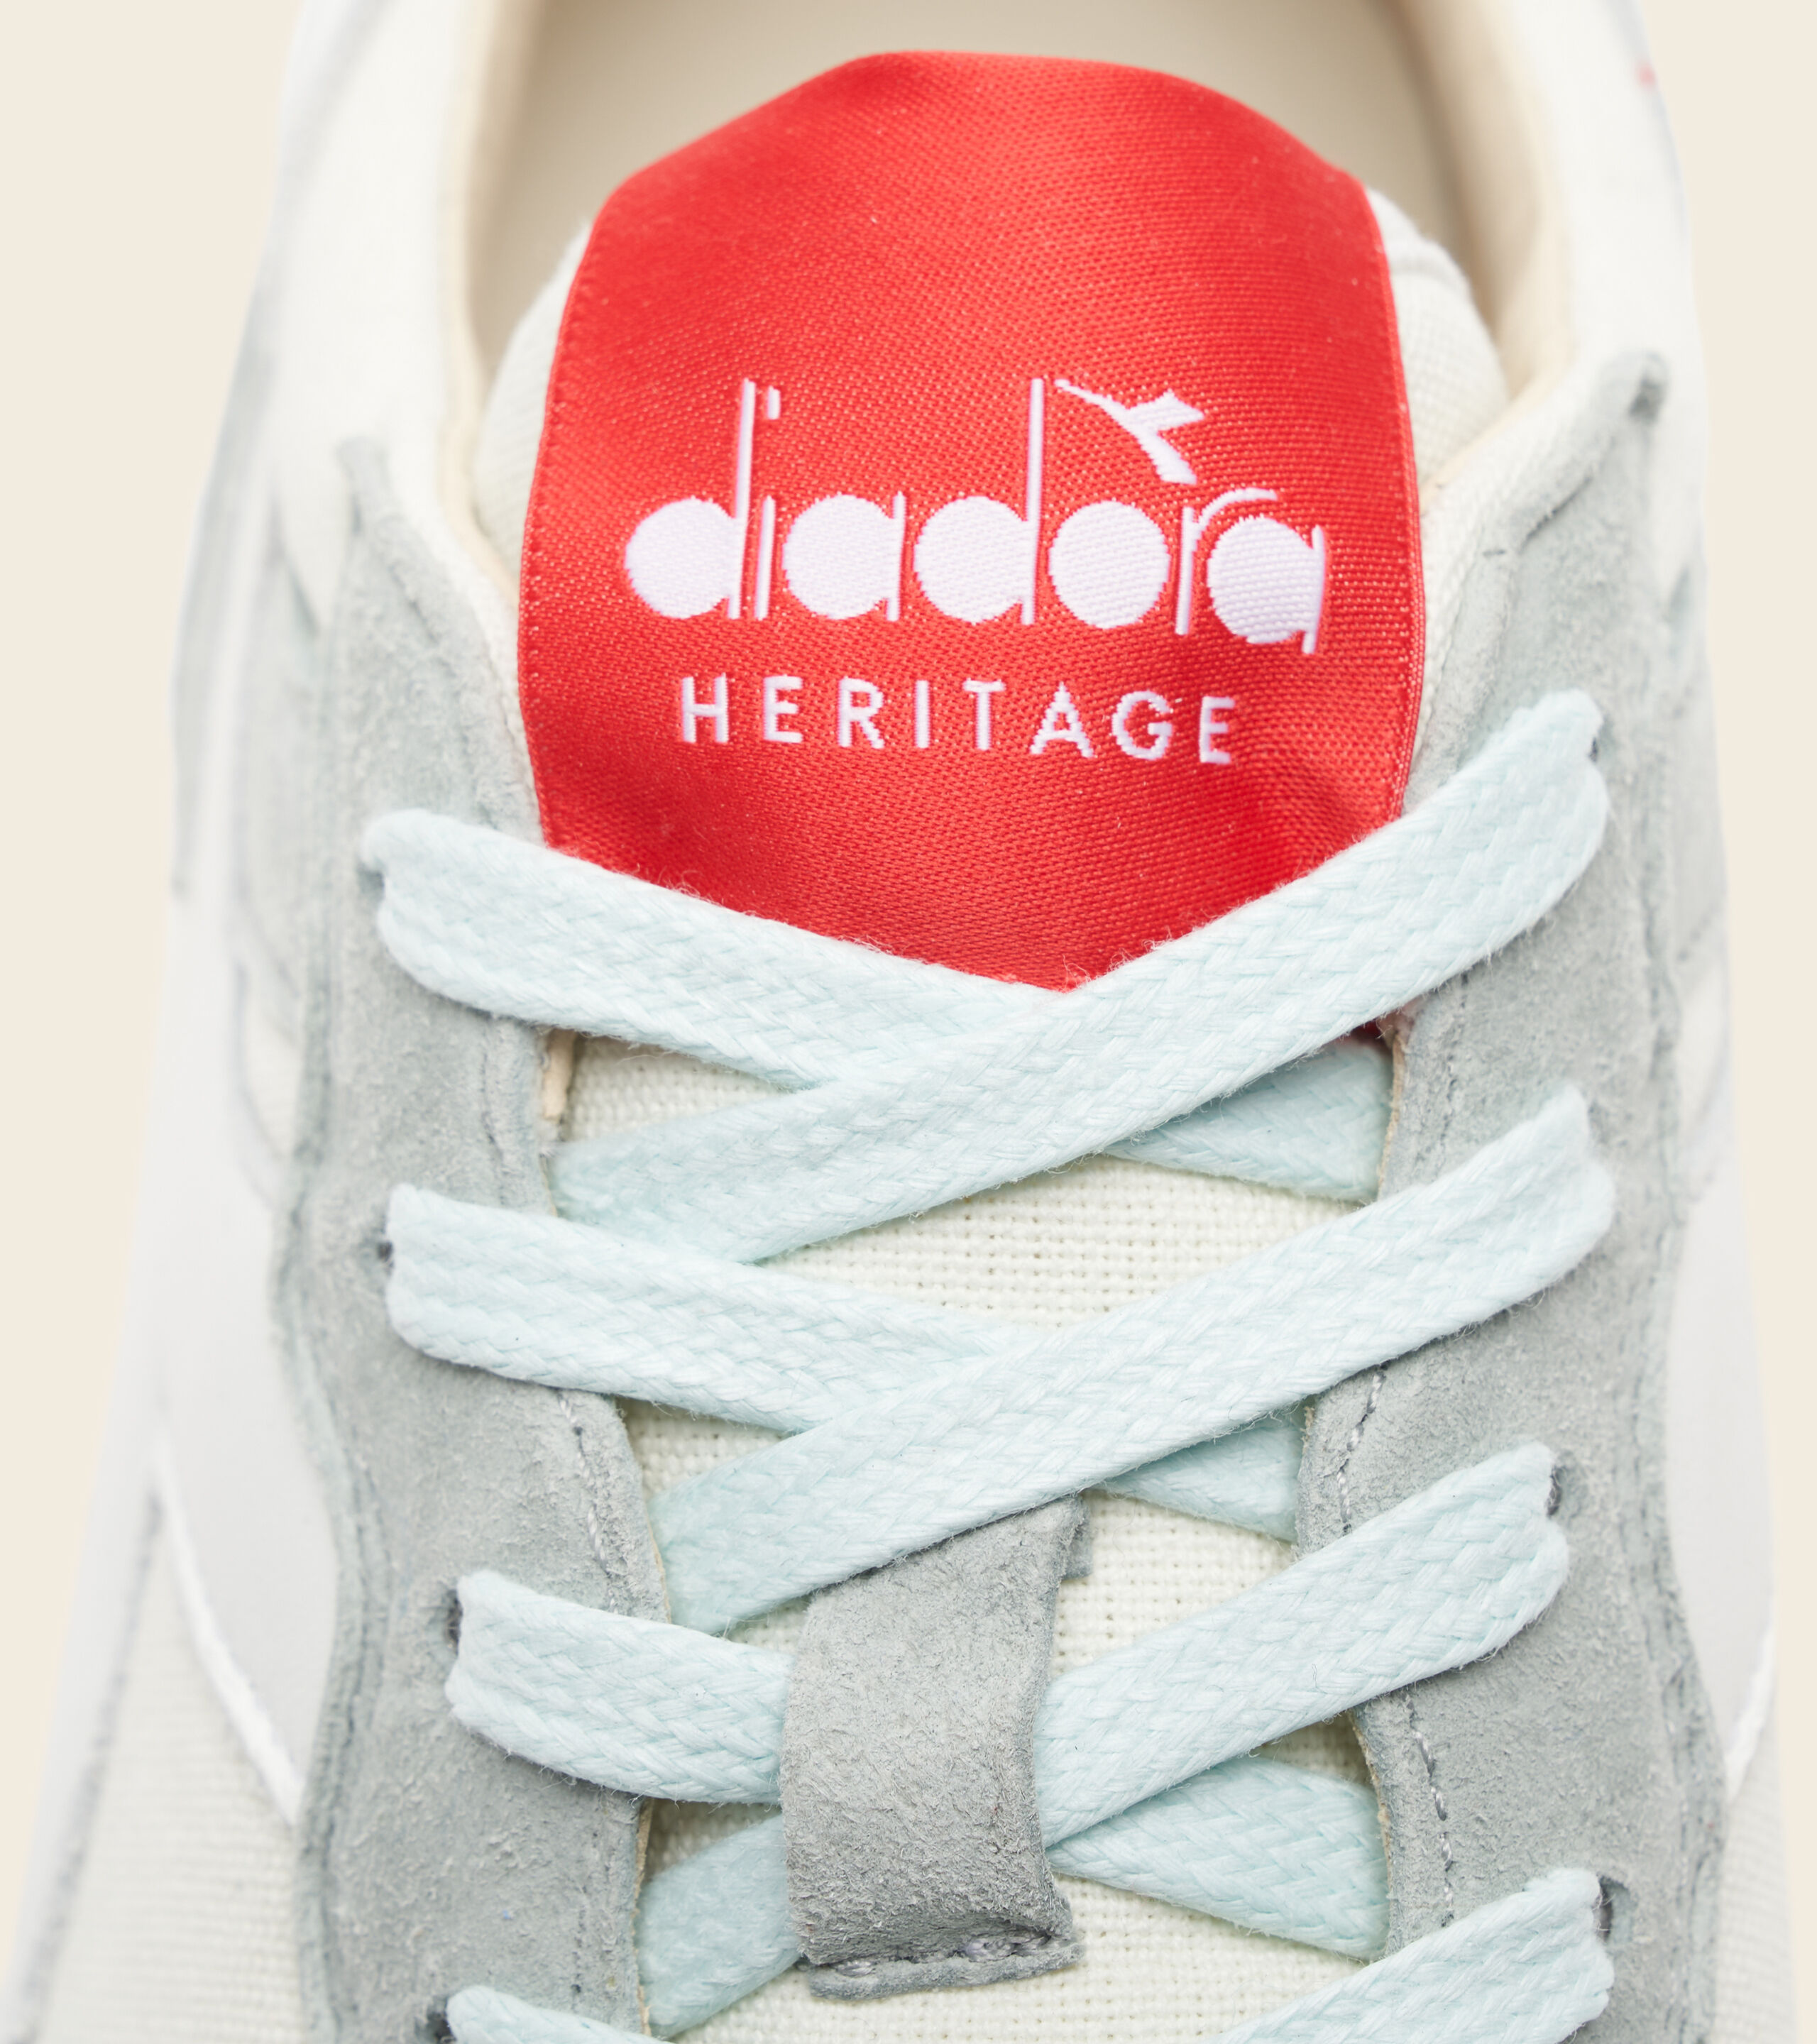 Diadora Heritage Men Sneakers Low Top Lace Up Athletic Shoes Trainers TRIDENT